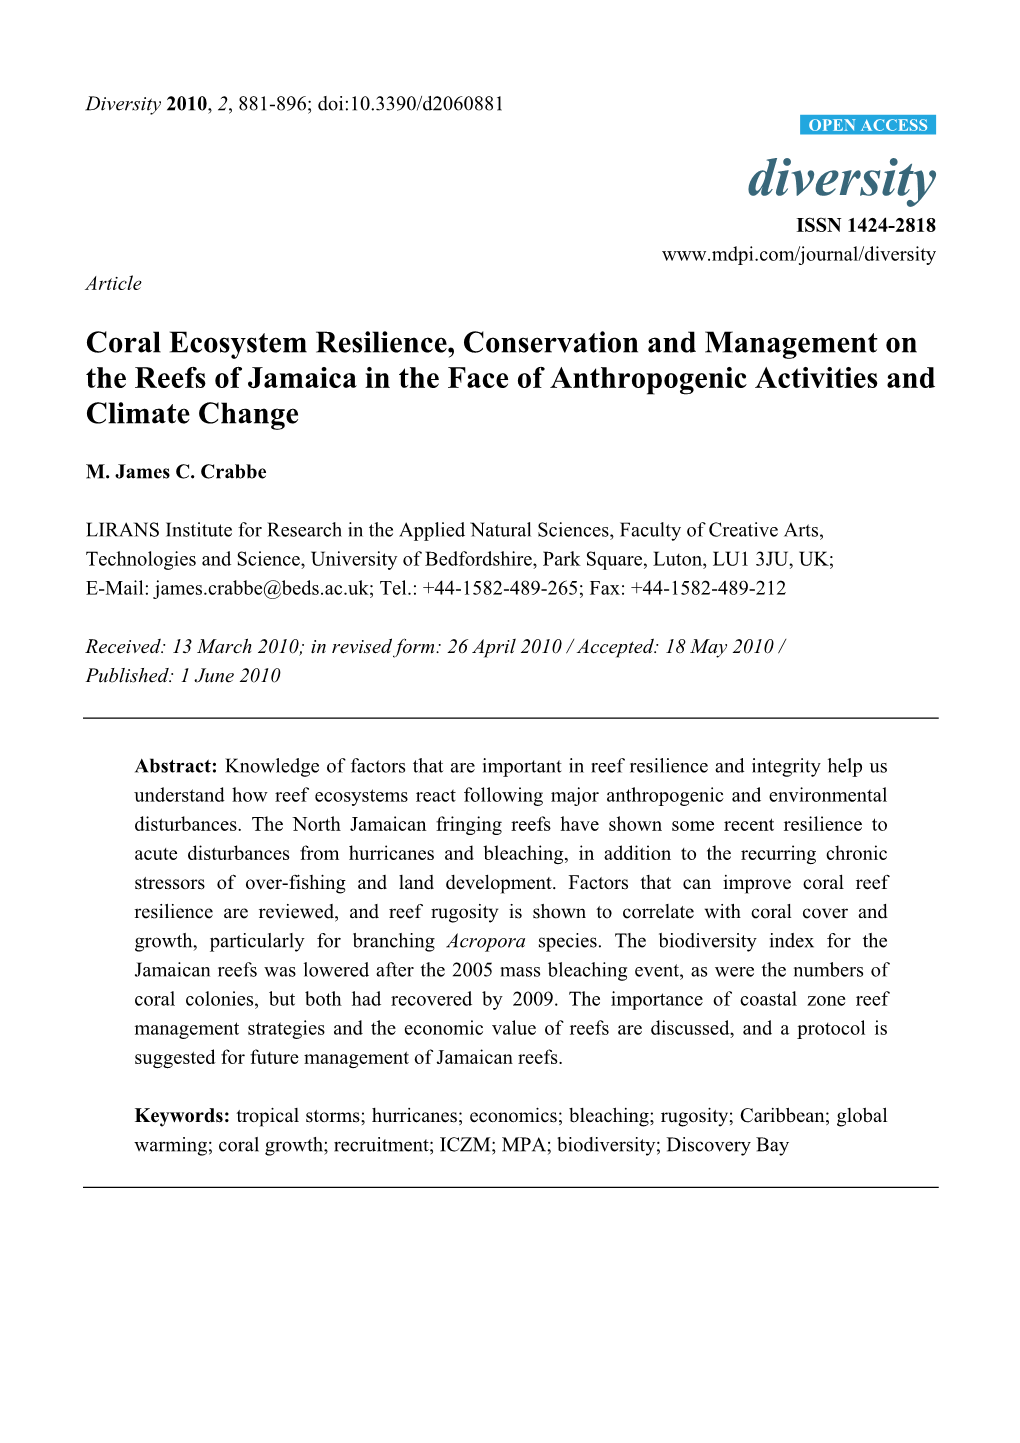 Coral Ecosystem Resilience, Conservation and Management on the Reefs of Jamaica in the Face of Anthropogenic Activities and Climate Change